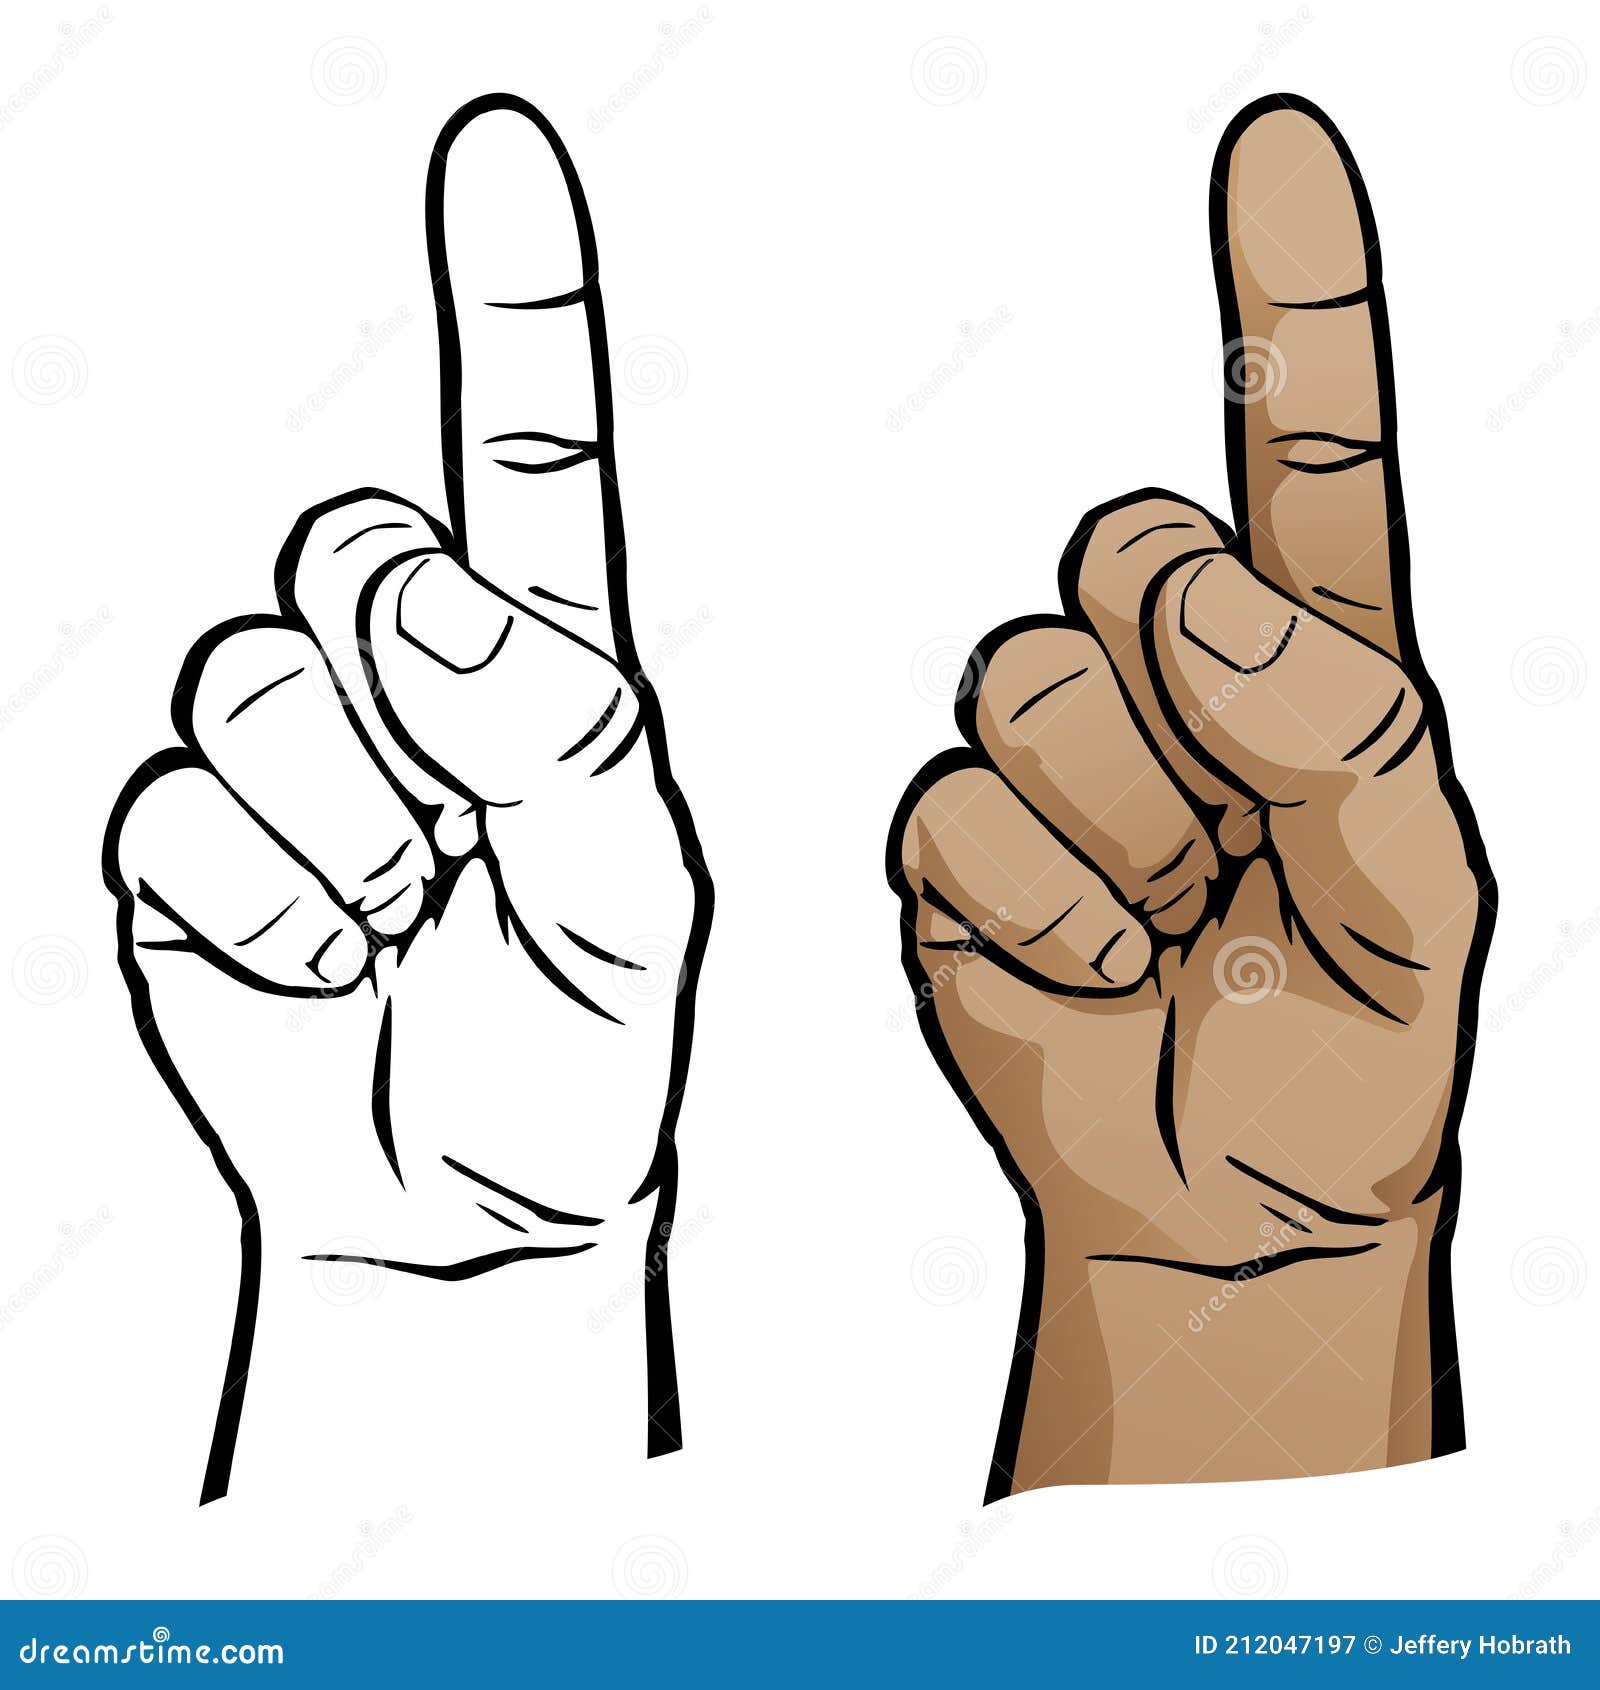 Number one hand gesture.ai Royalty Free Stock SVG Vector and Clip Art